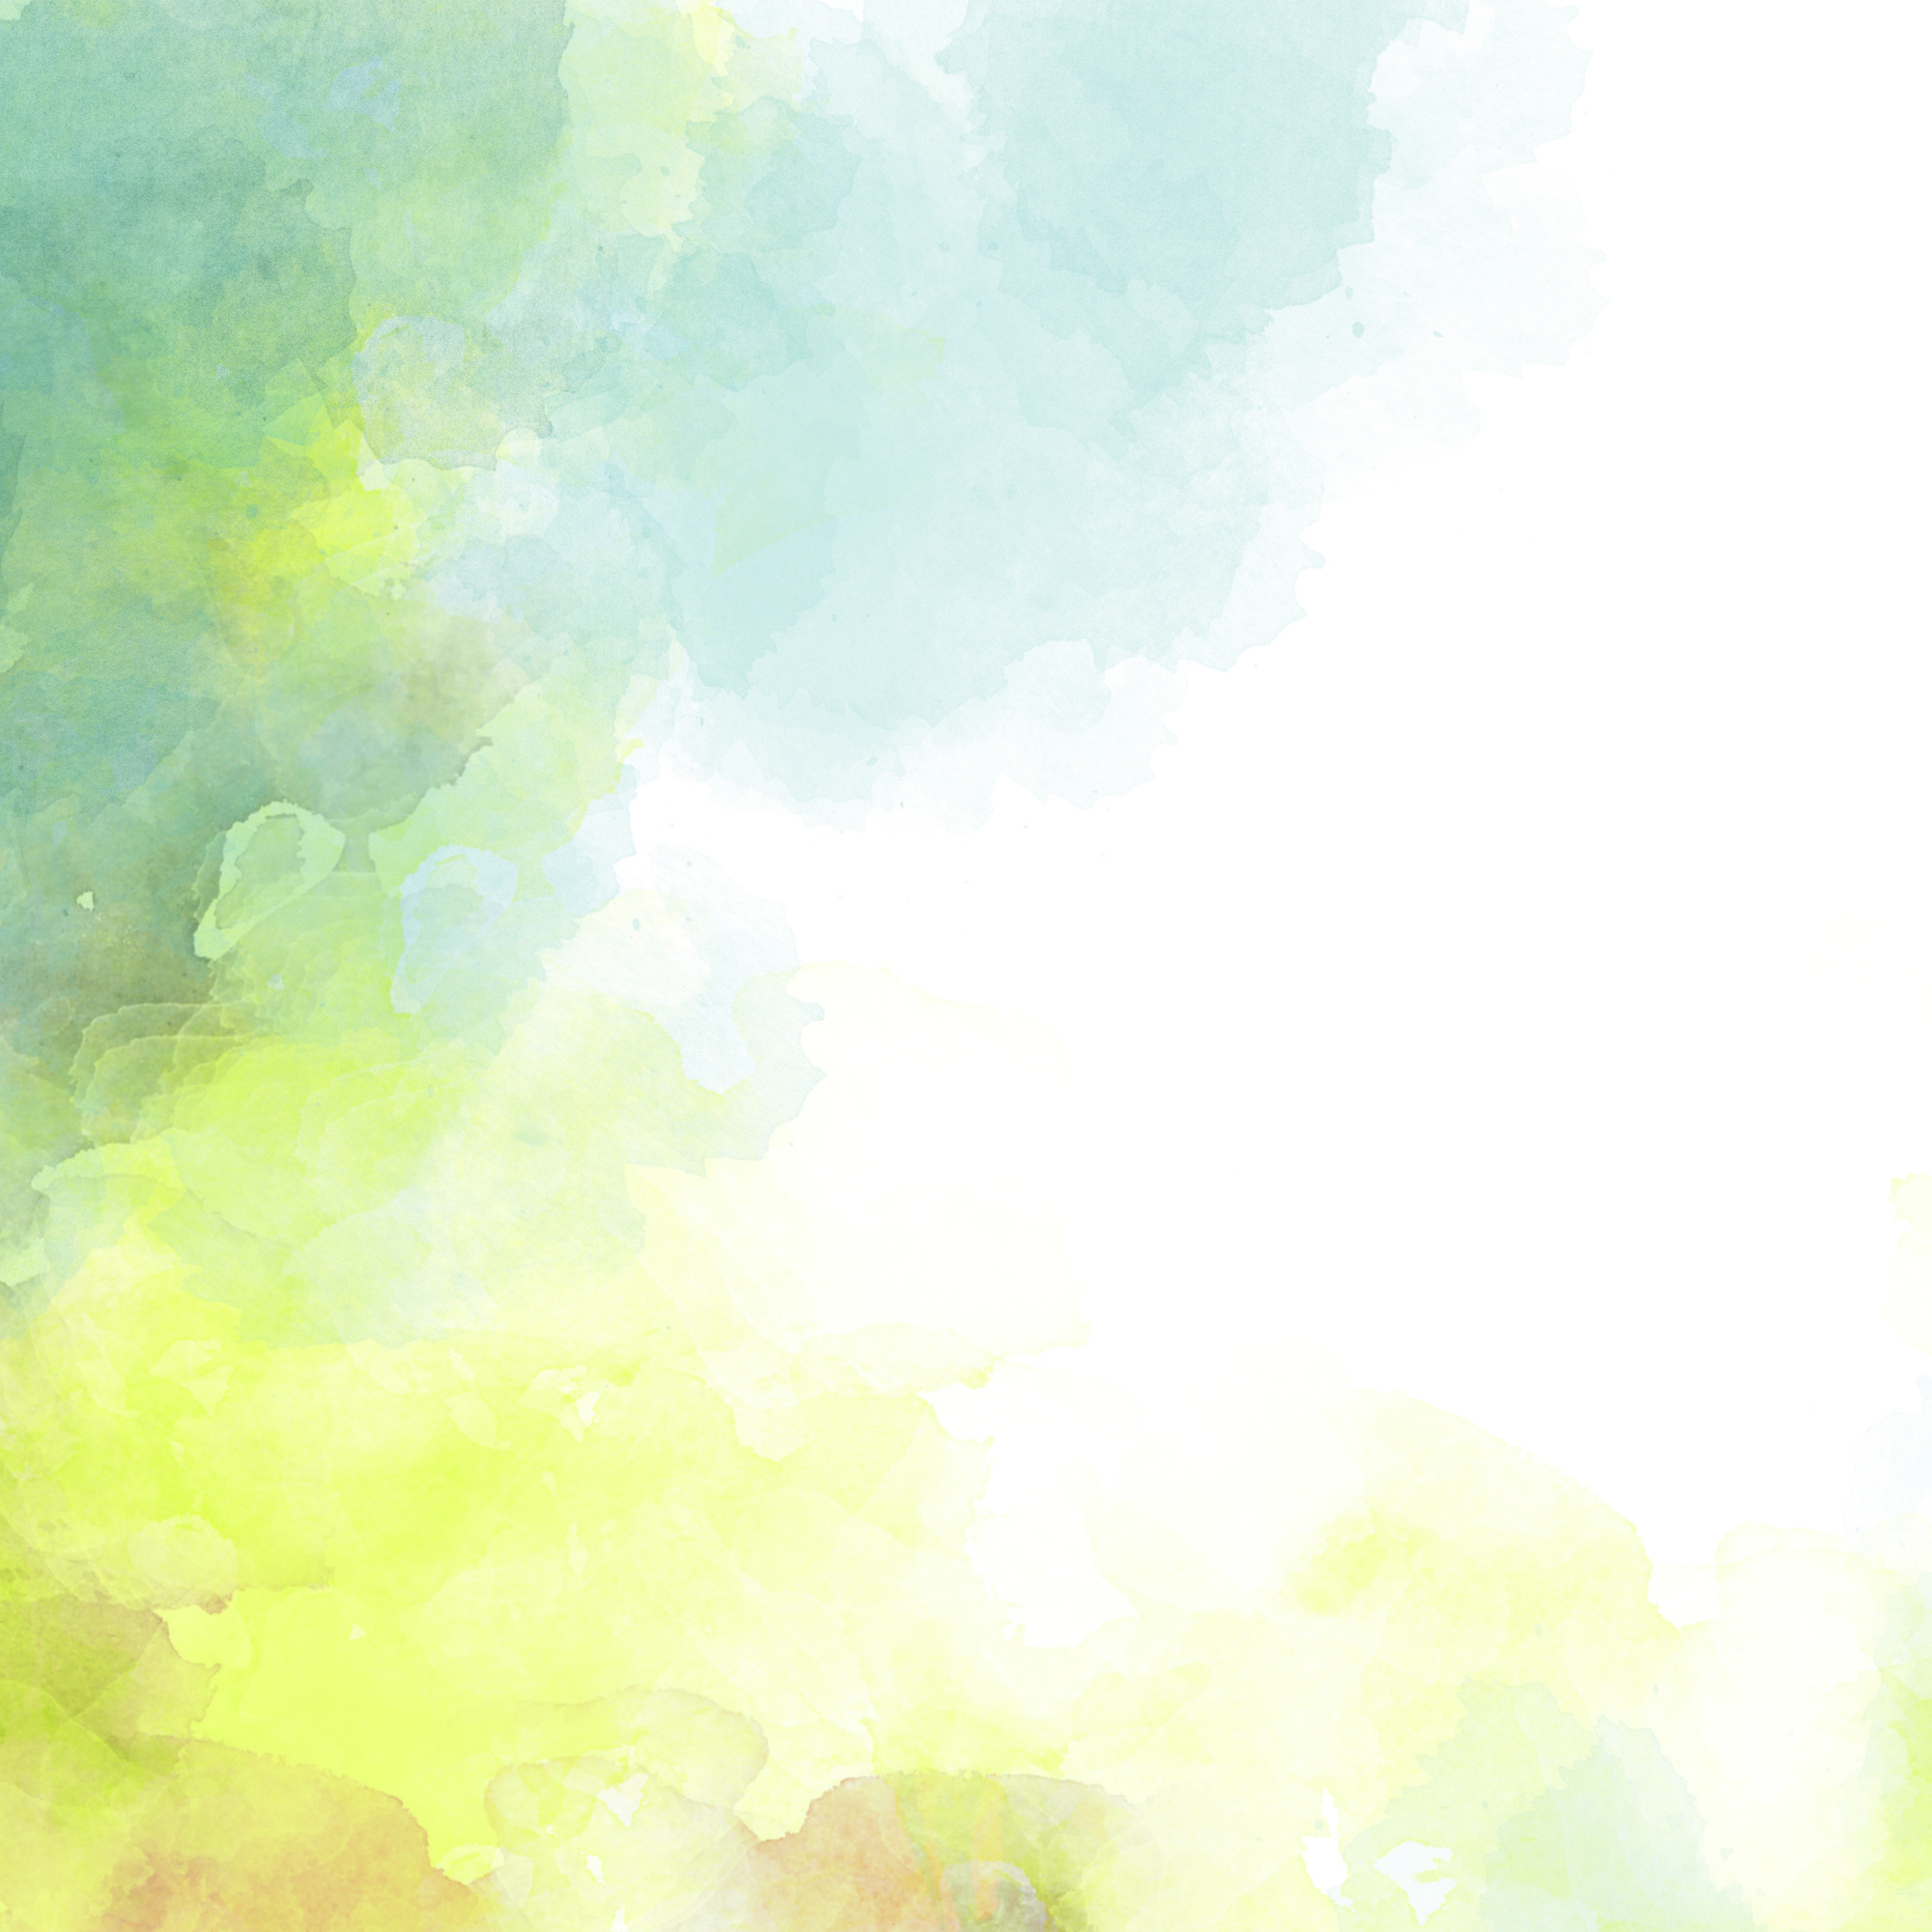 Green Watercolor Stain Background